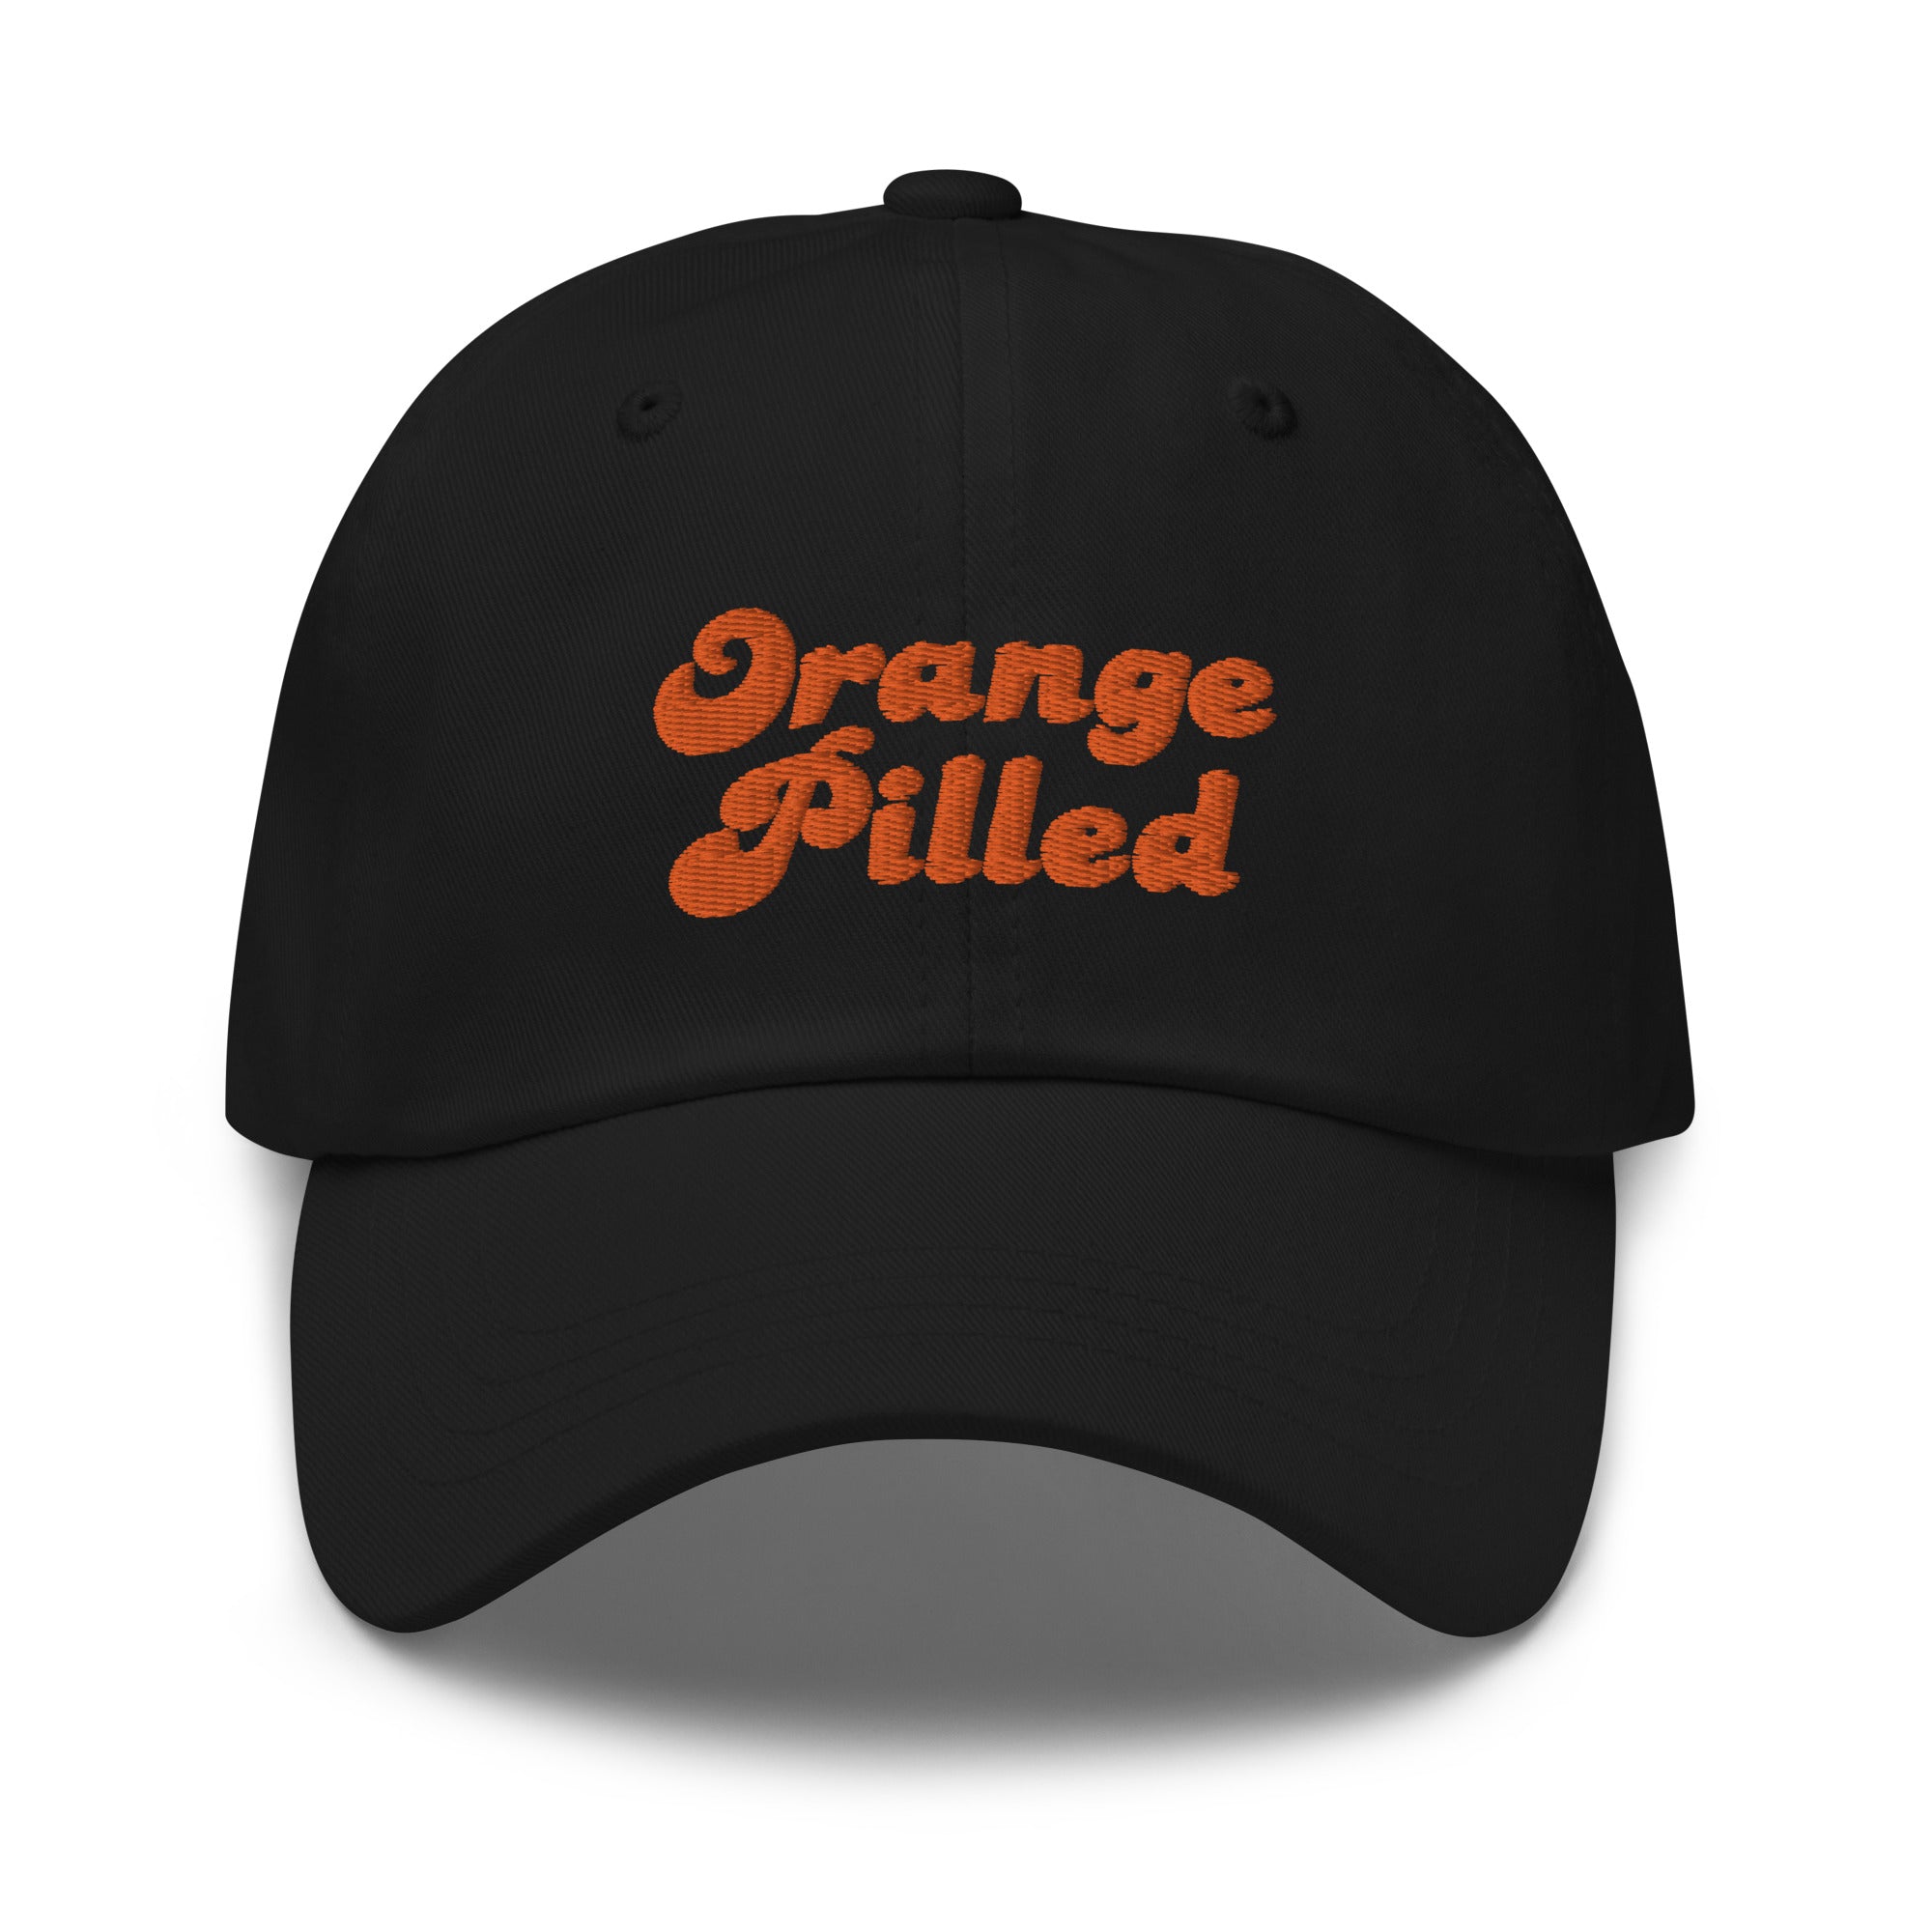 Bitcoin Hat - The Orange Pilled Hat features embroidered designs on the front and back. Color: Black. Front view. 